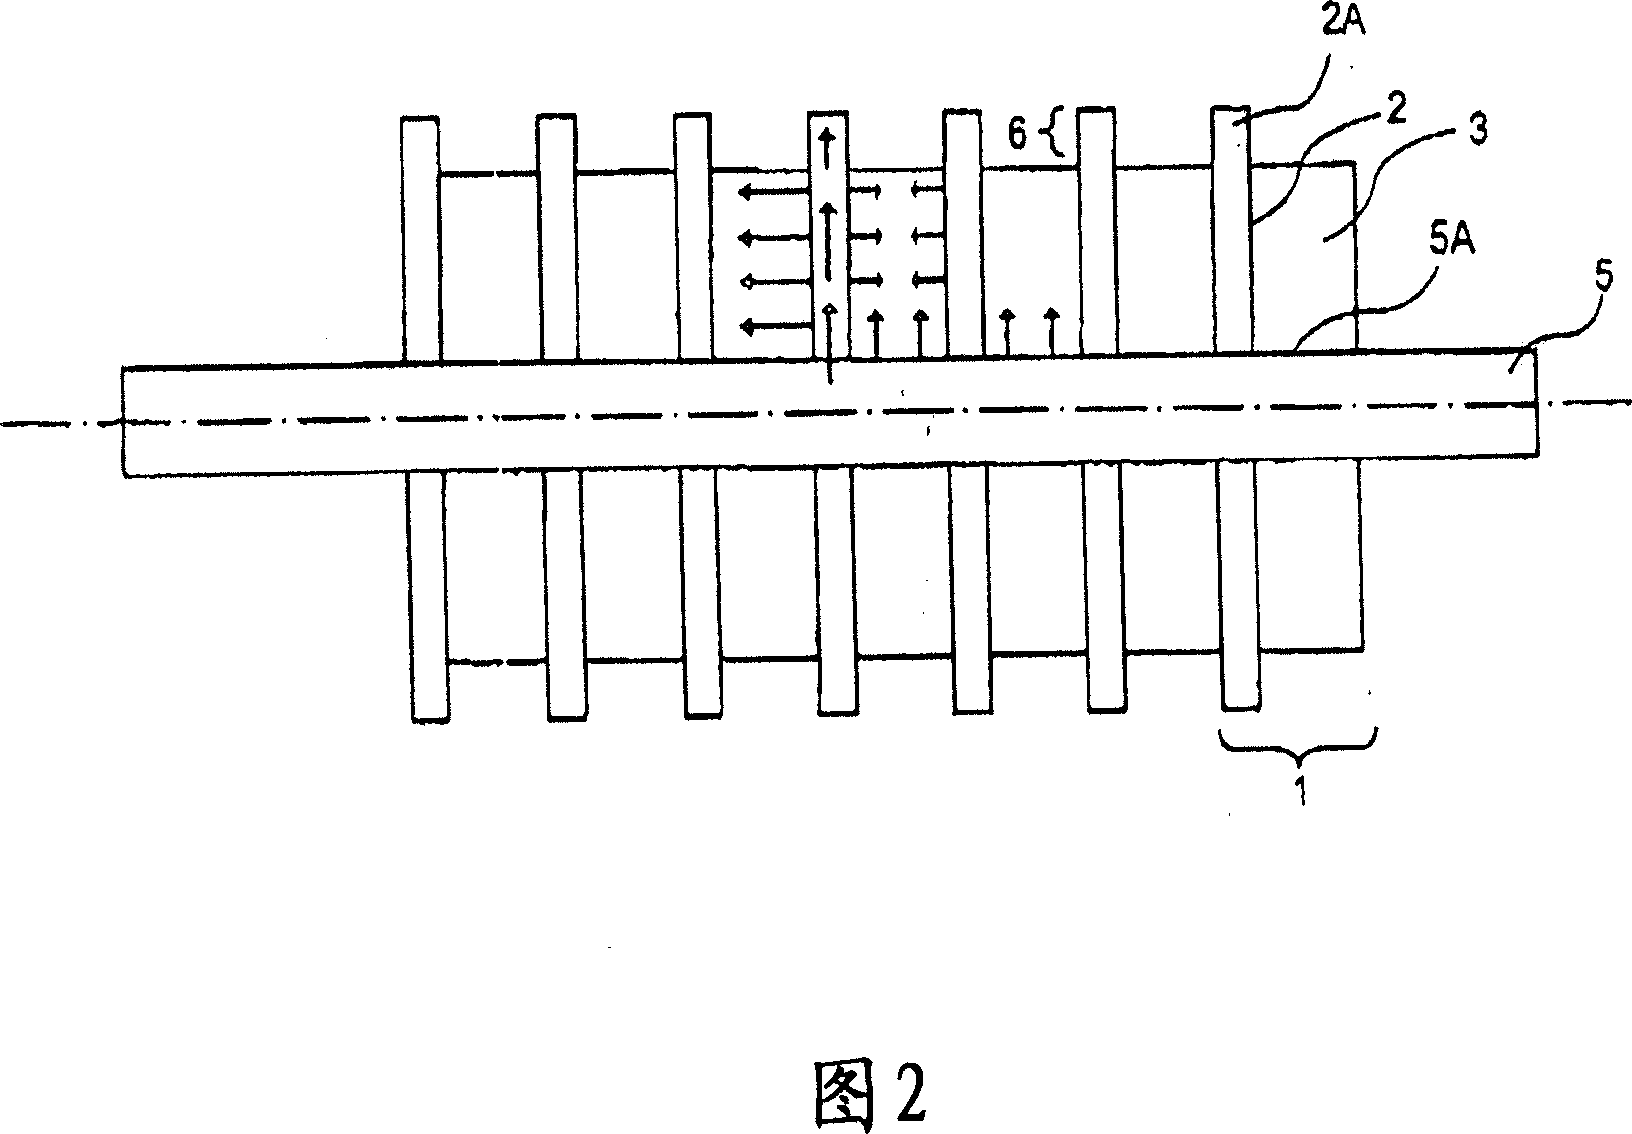 Latent heat storing device